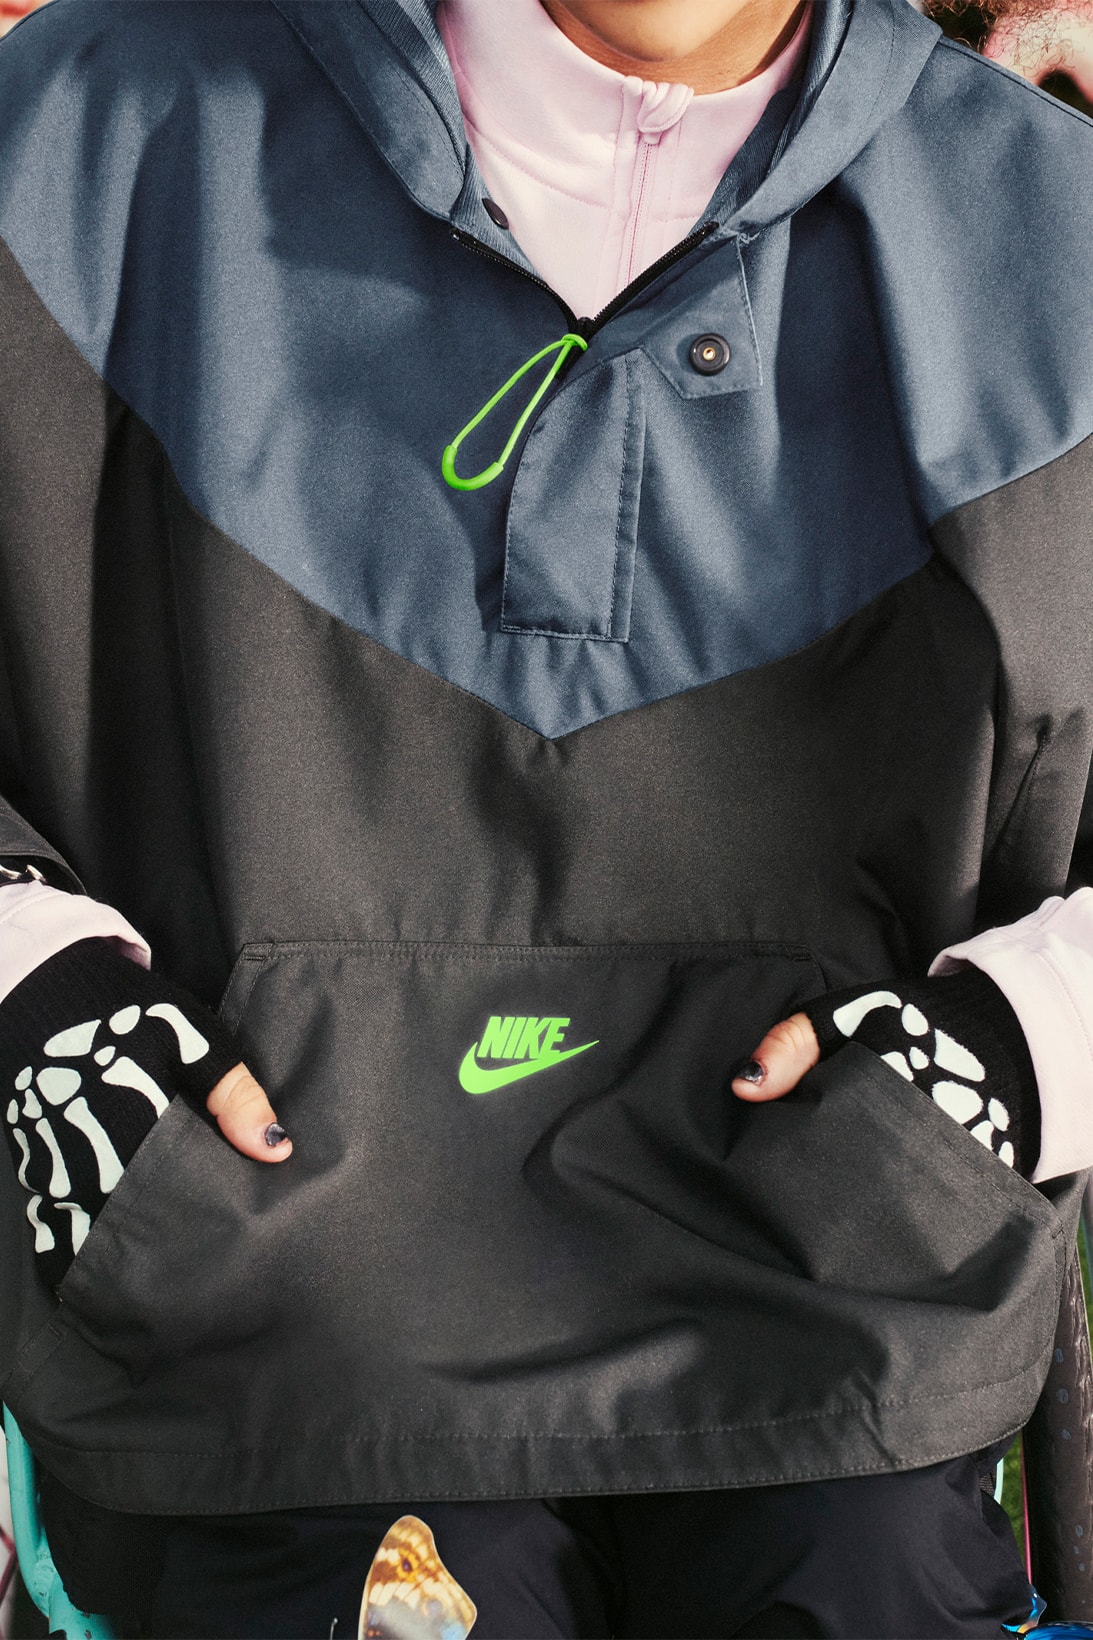 Nike Kids Easy Wear Collection Outerwear Poncho Black Details